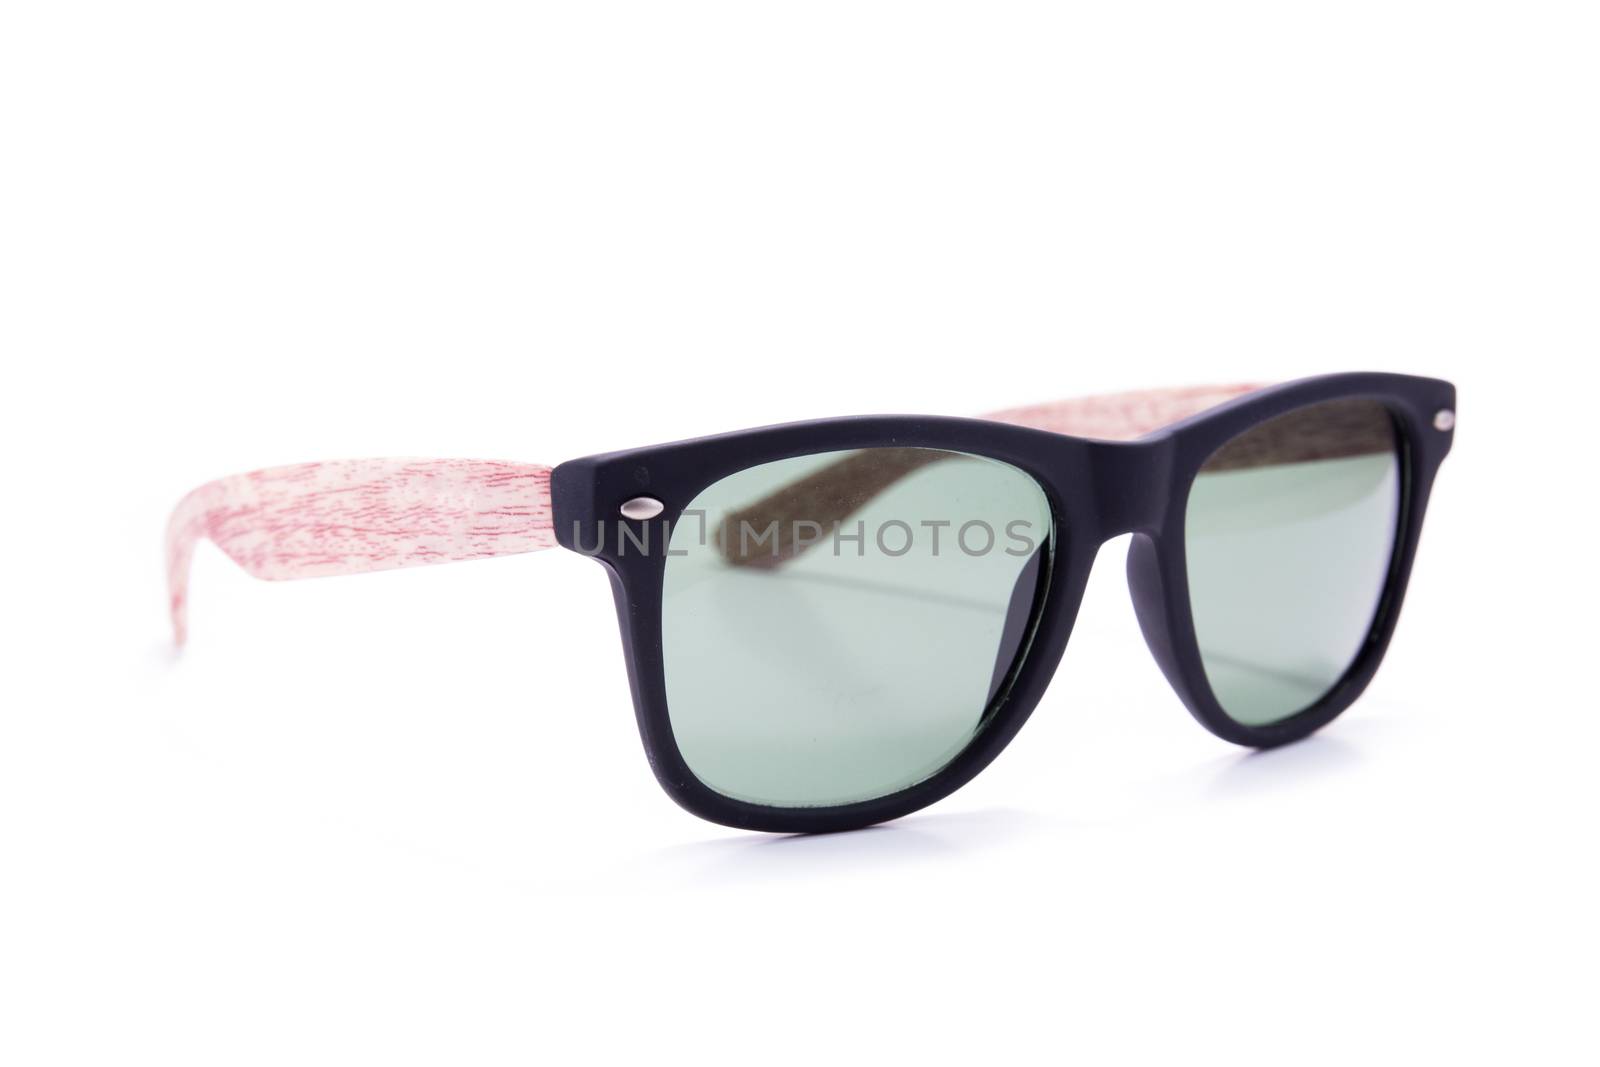 Sunglasses fasion isolated on white background. accessory object